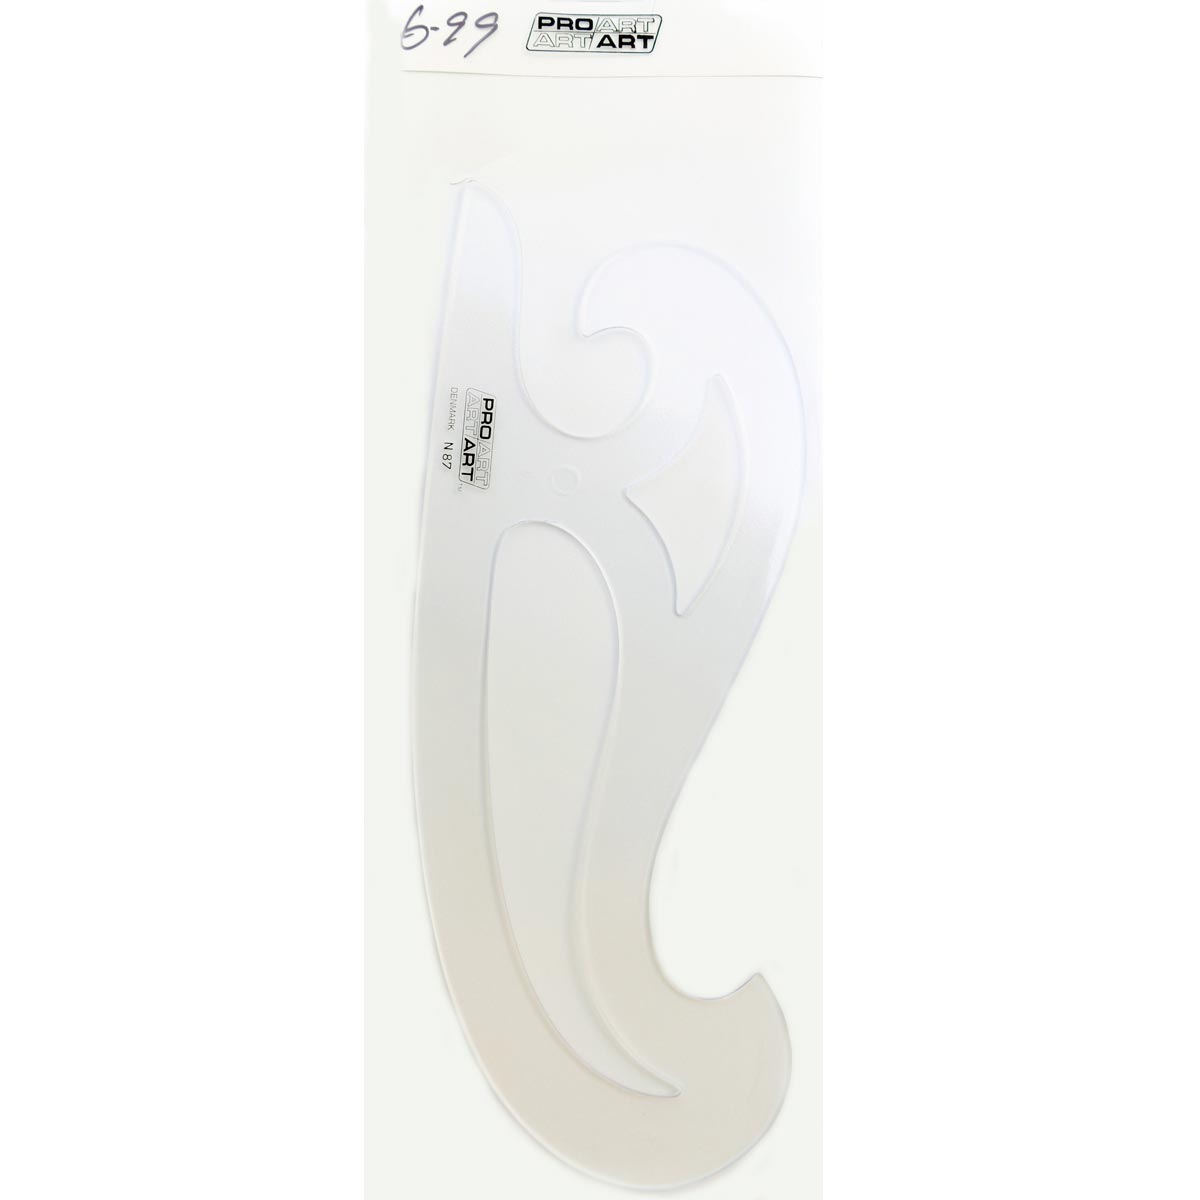 Pro Art French Curve 11 inches (27 cm)